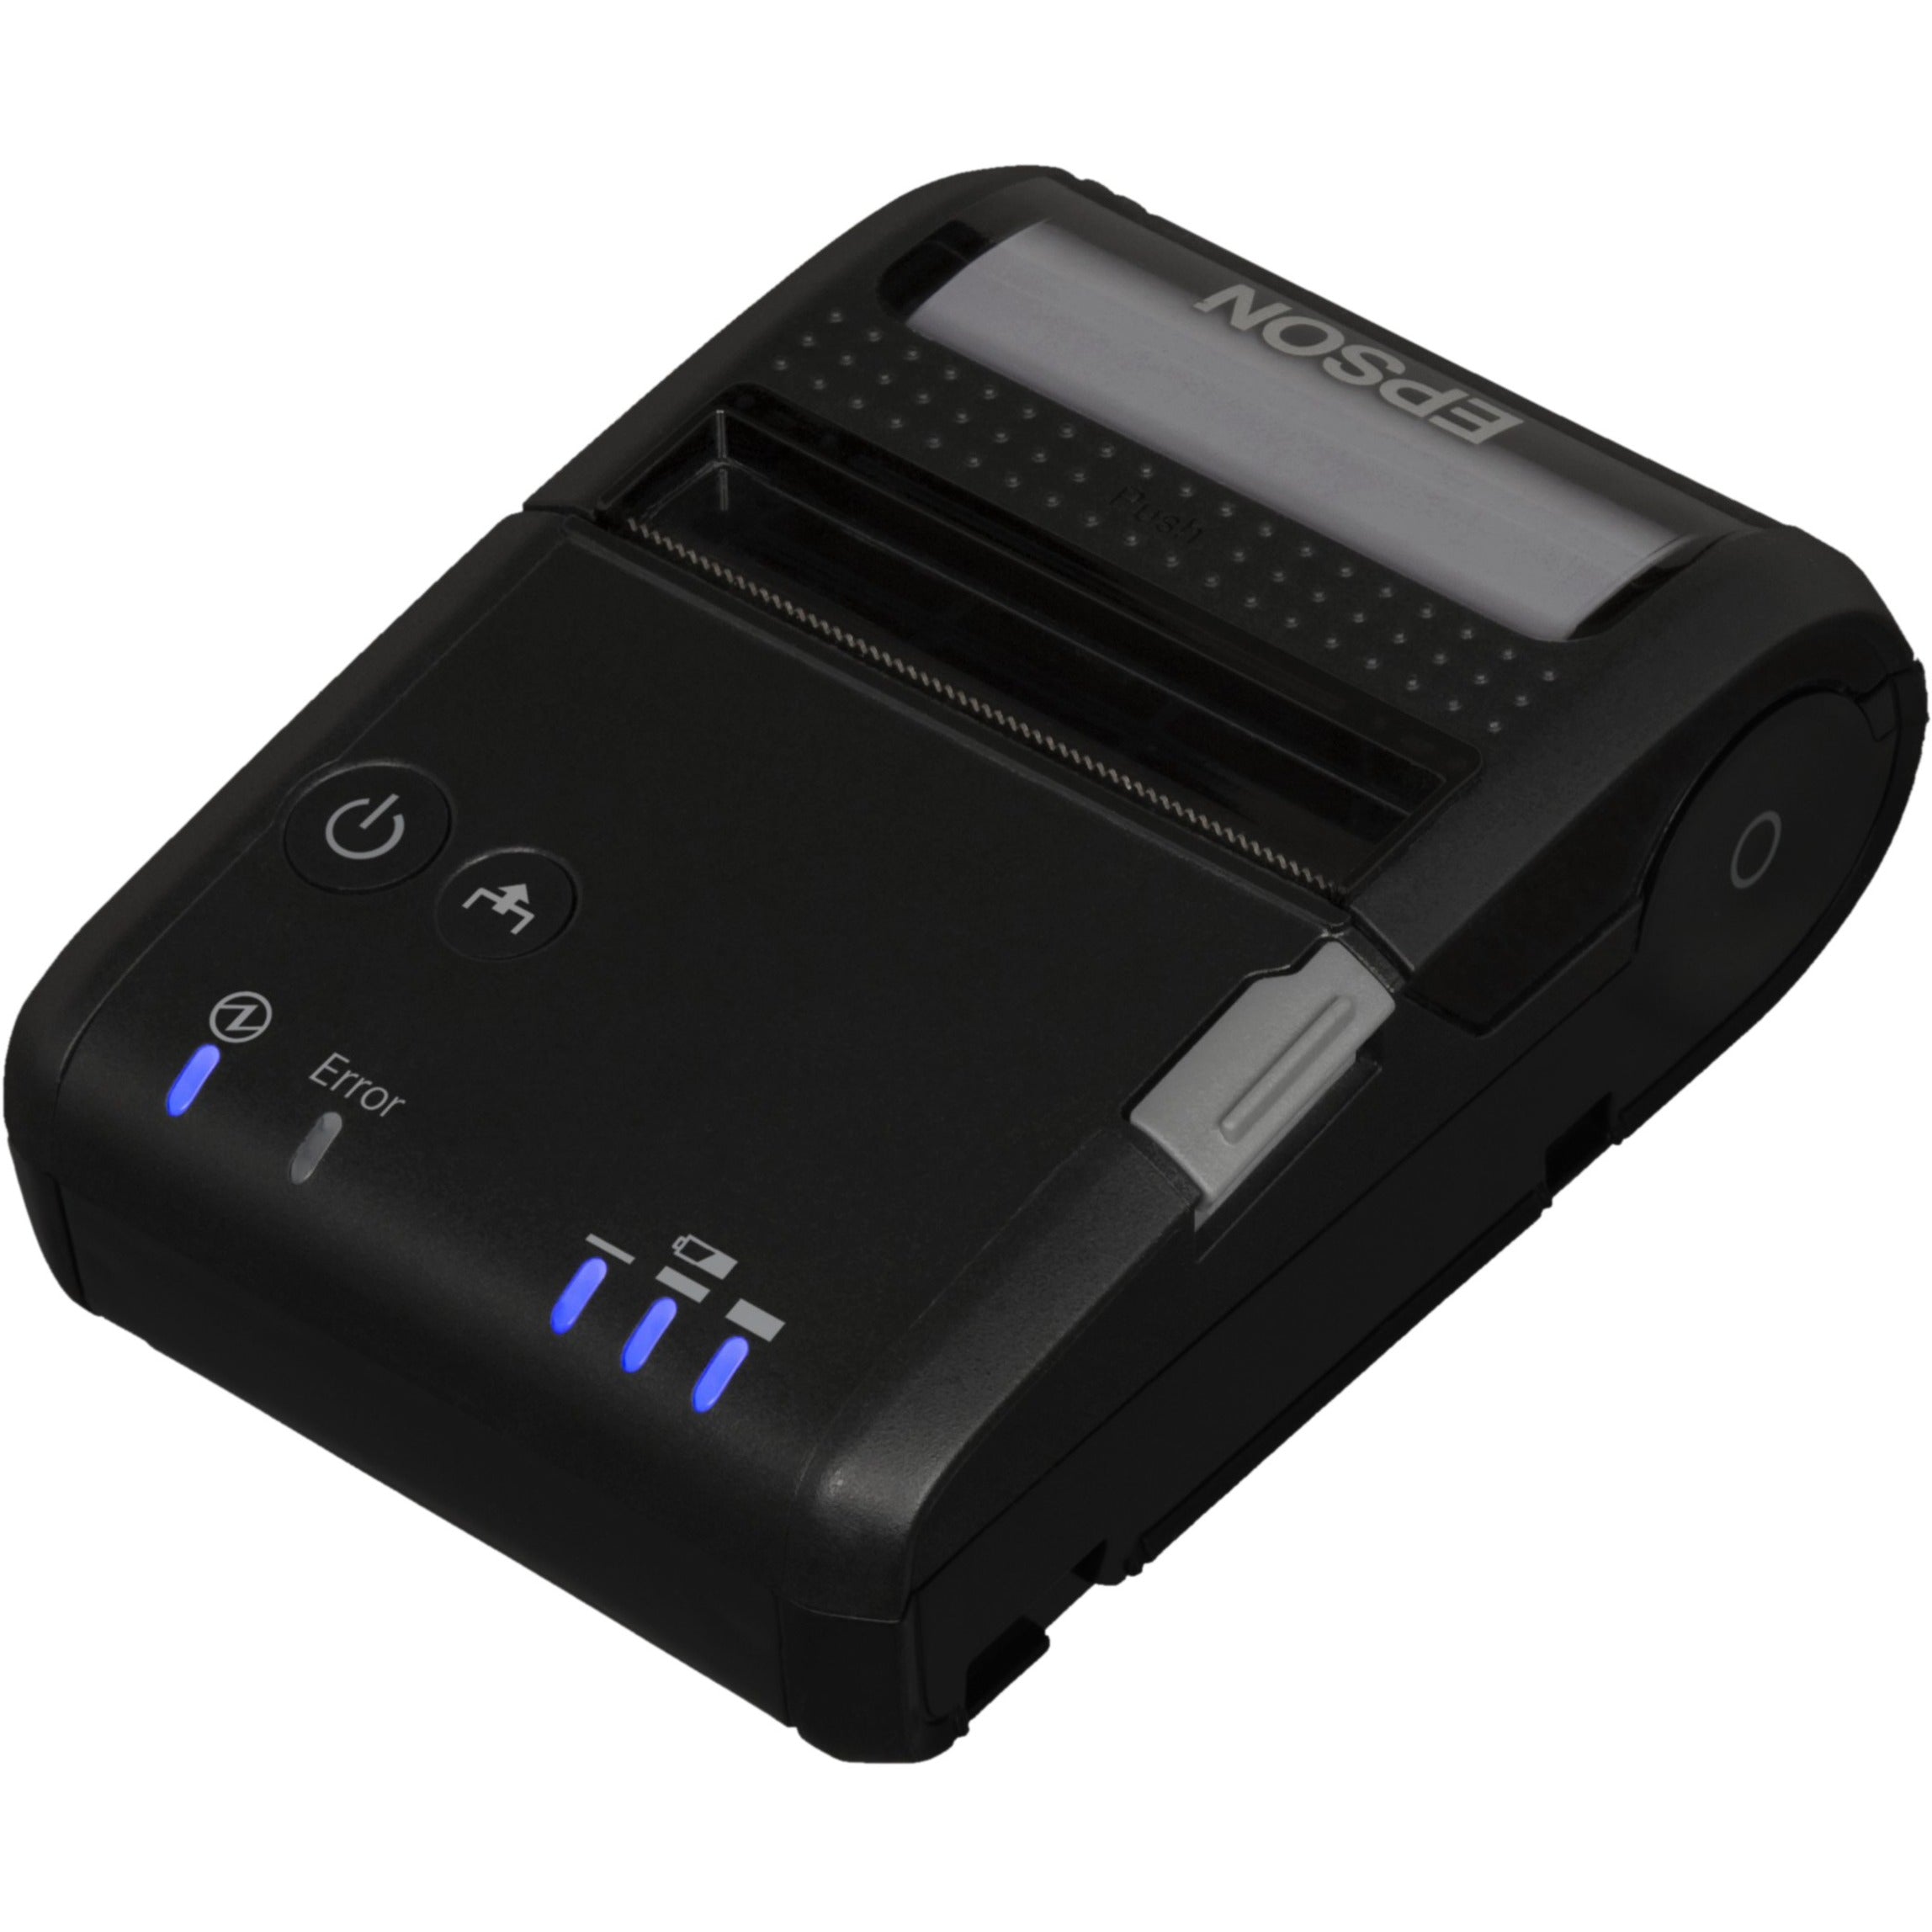 Epson C31CE14551 Mobilink P20 2 Mobile Printer, Bluetooth, Battery Included